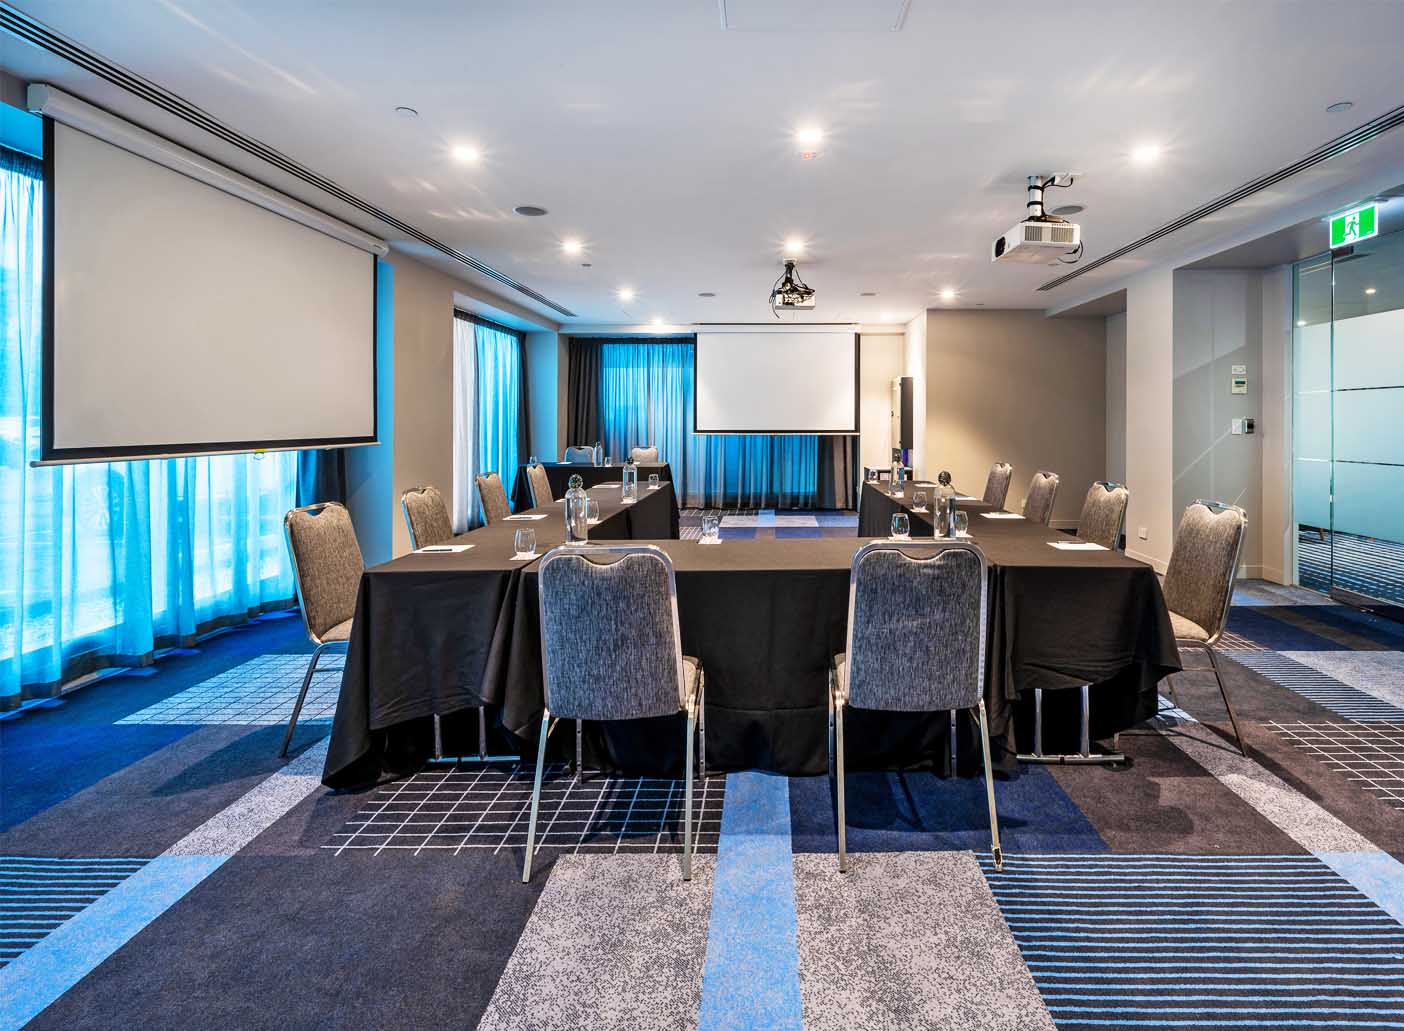 Novotel <br> Corporate Function Rooms